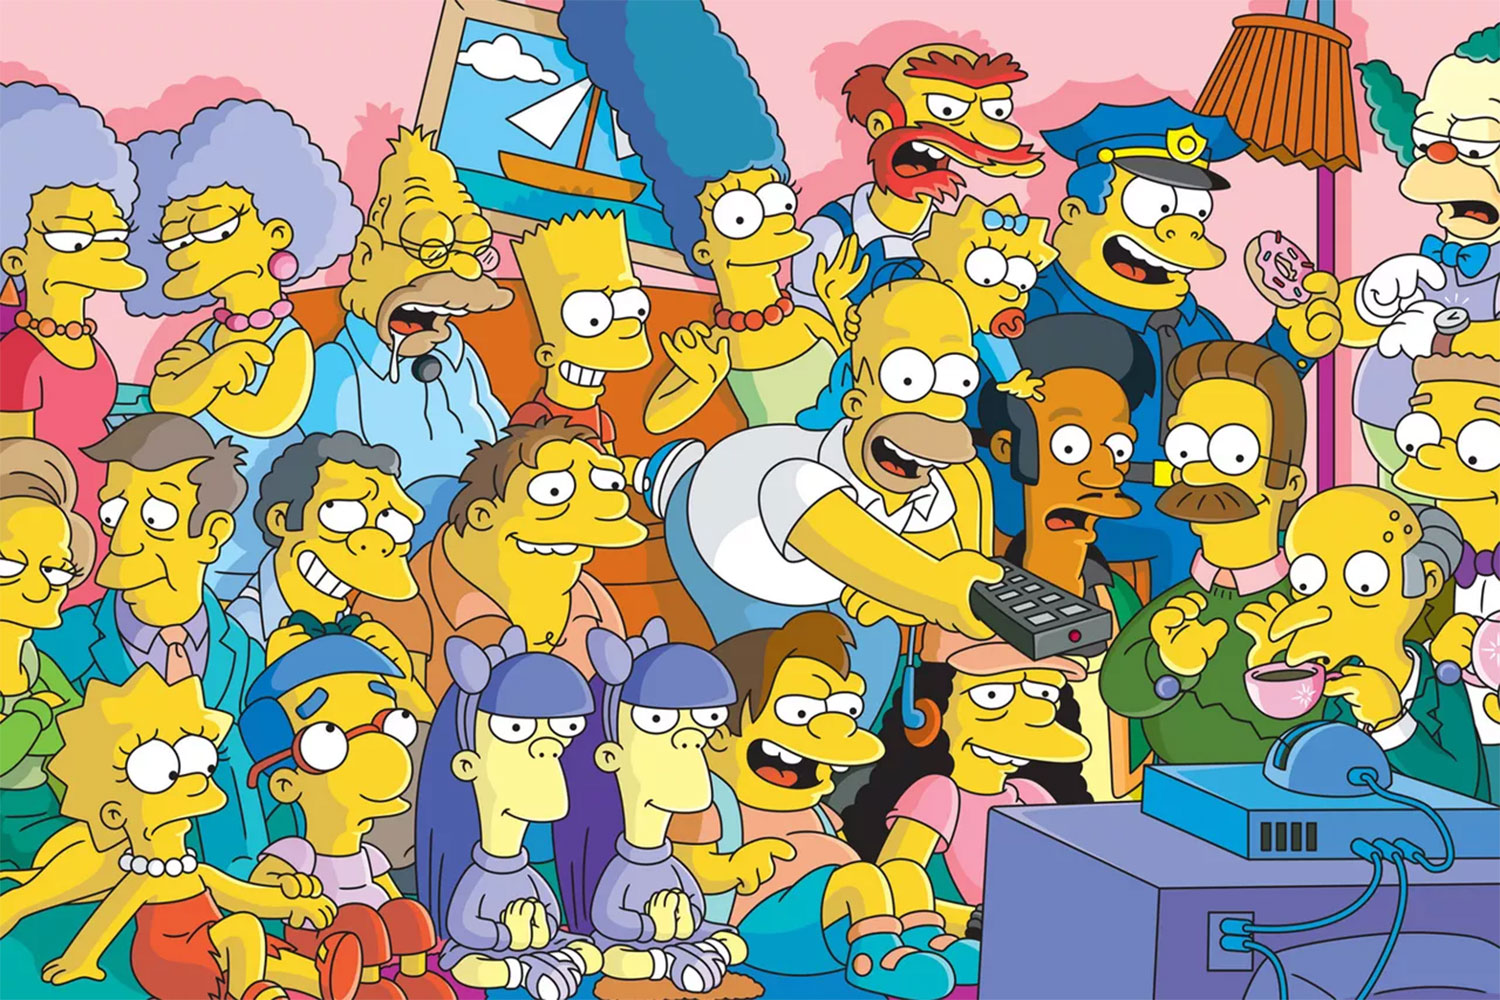 10 Simpsons episodes of all time, ranked - Manual